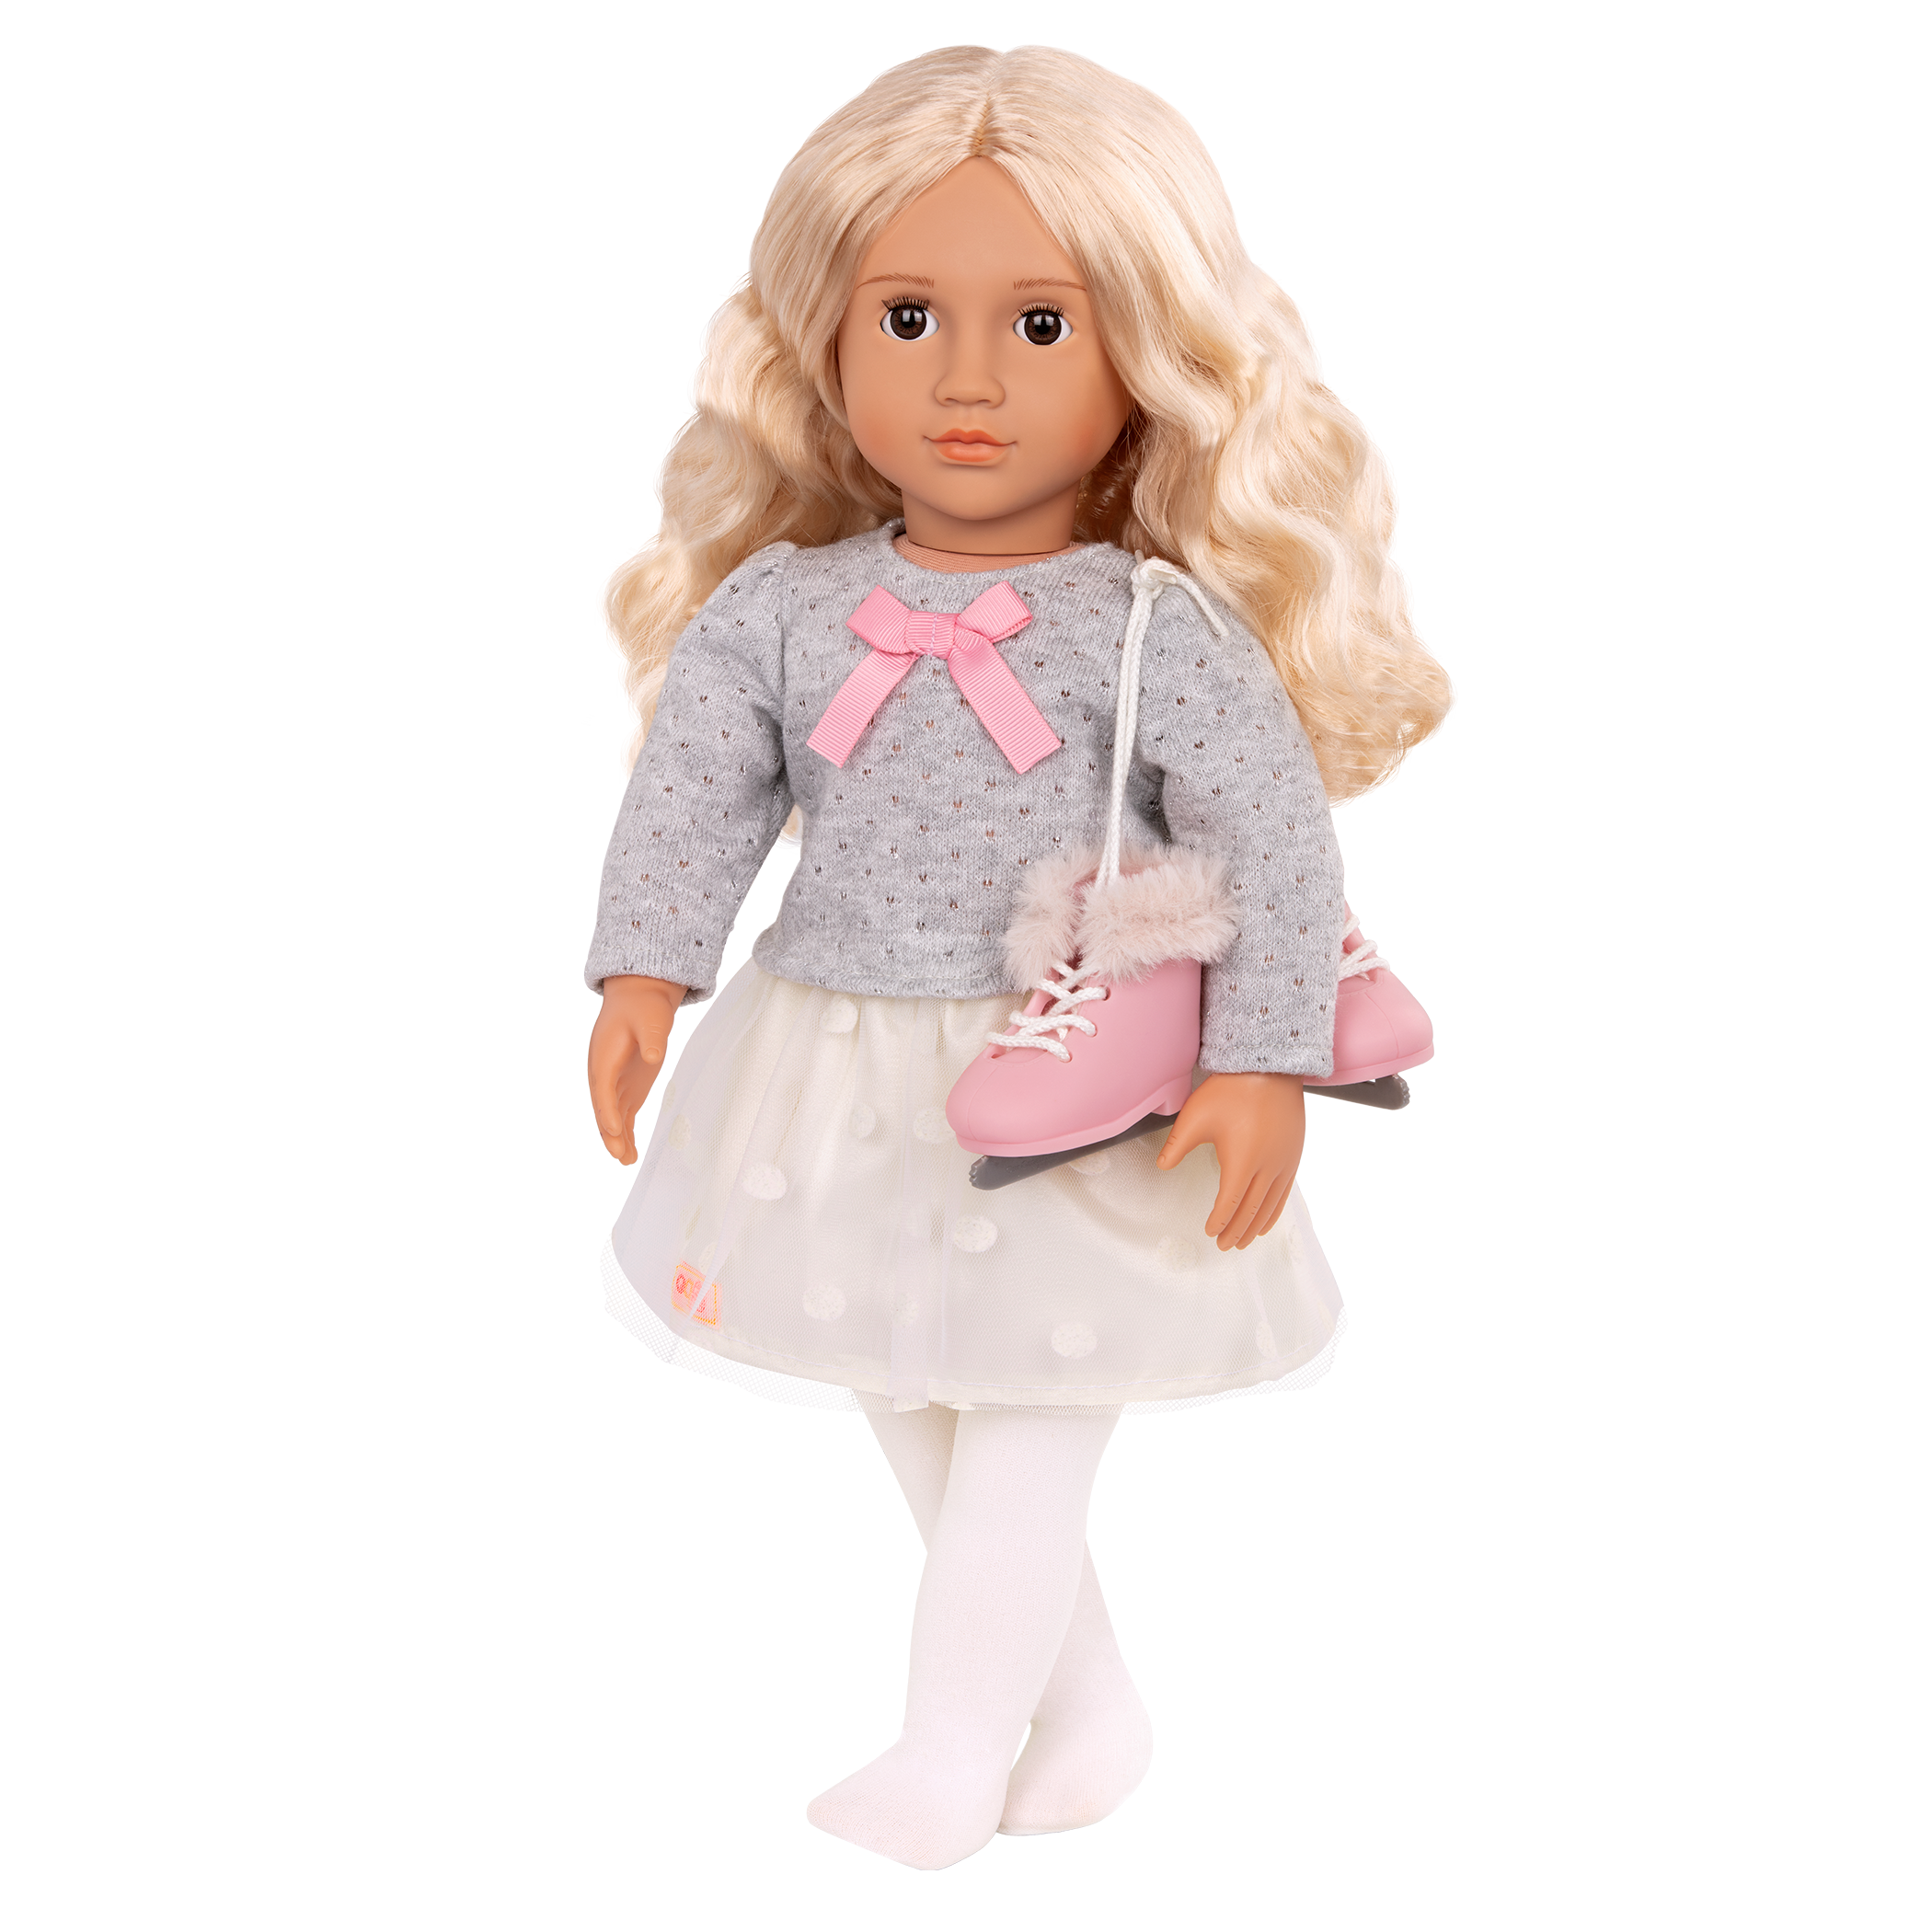 18-inch doll with blonde hair, brown eyes and ice skates